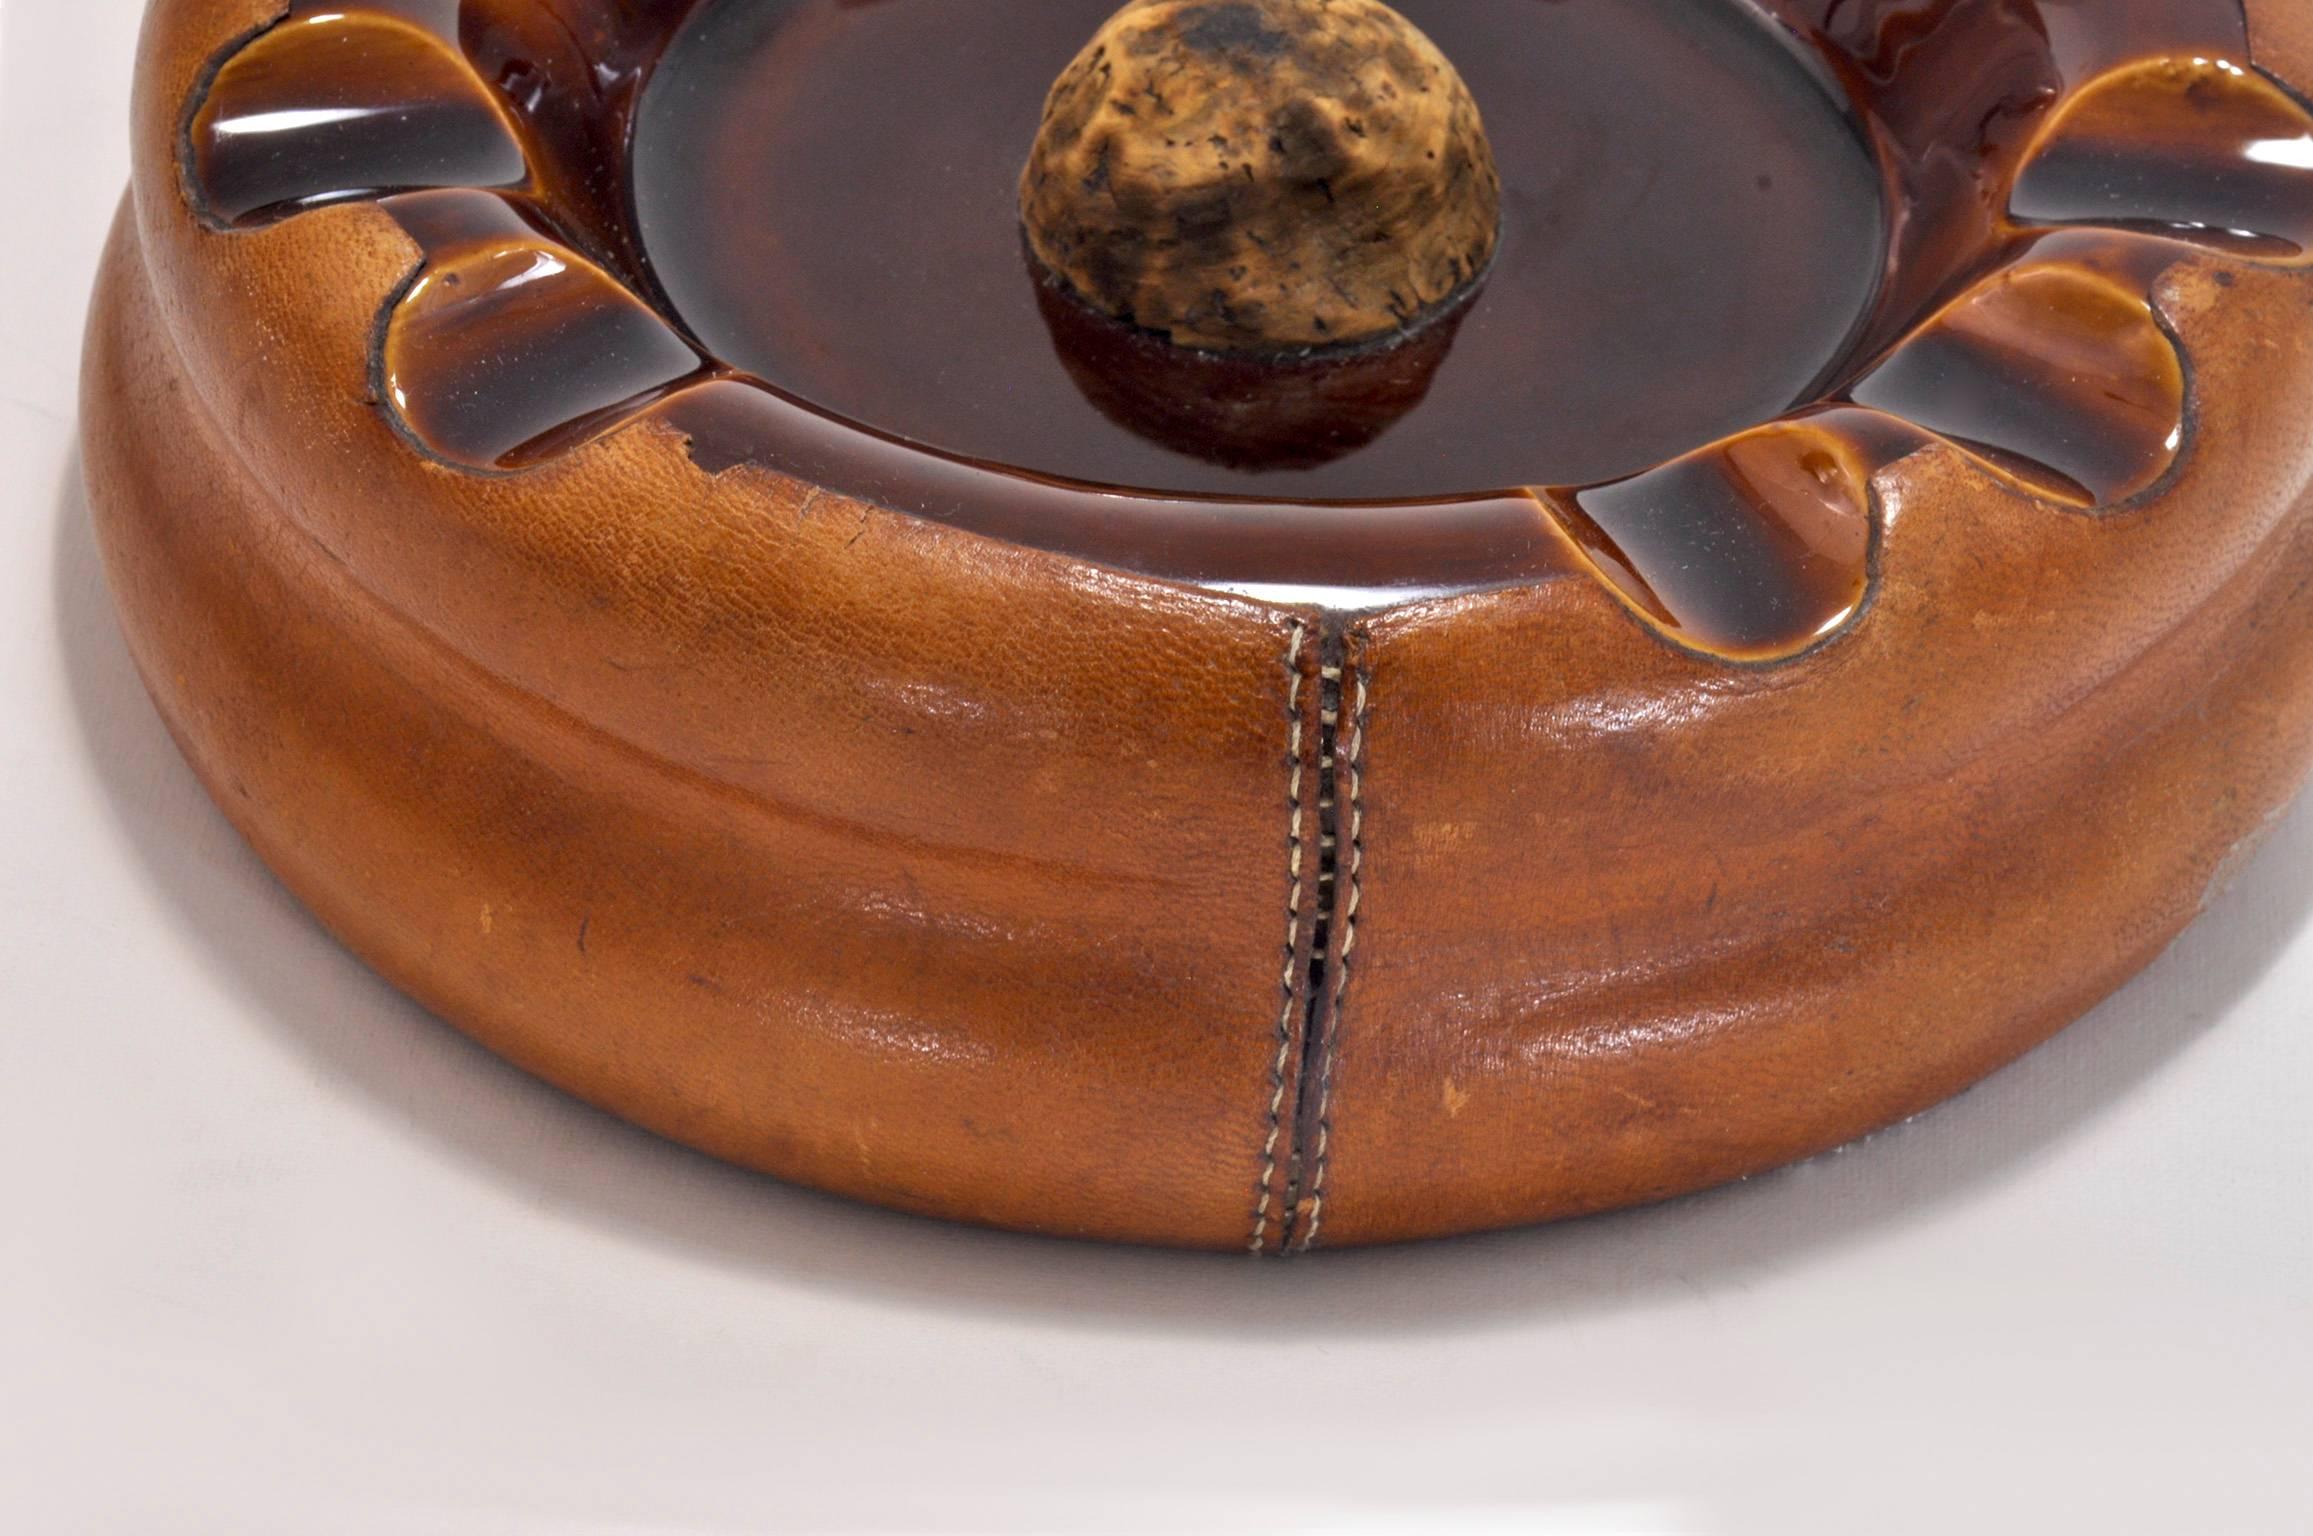 In the style of Jacques Adnet, it can be used as an Ashtray or as, an Decorative bowl too.